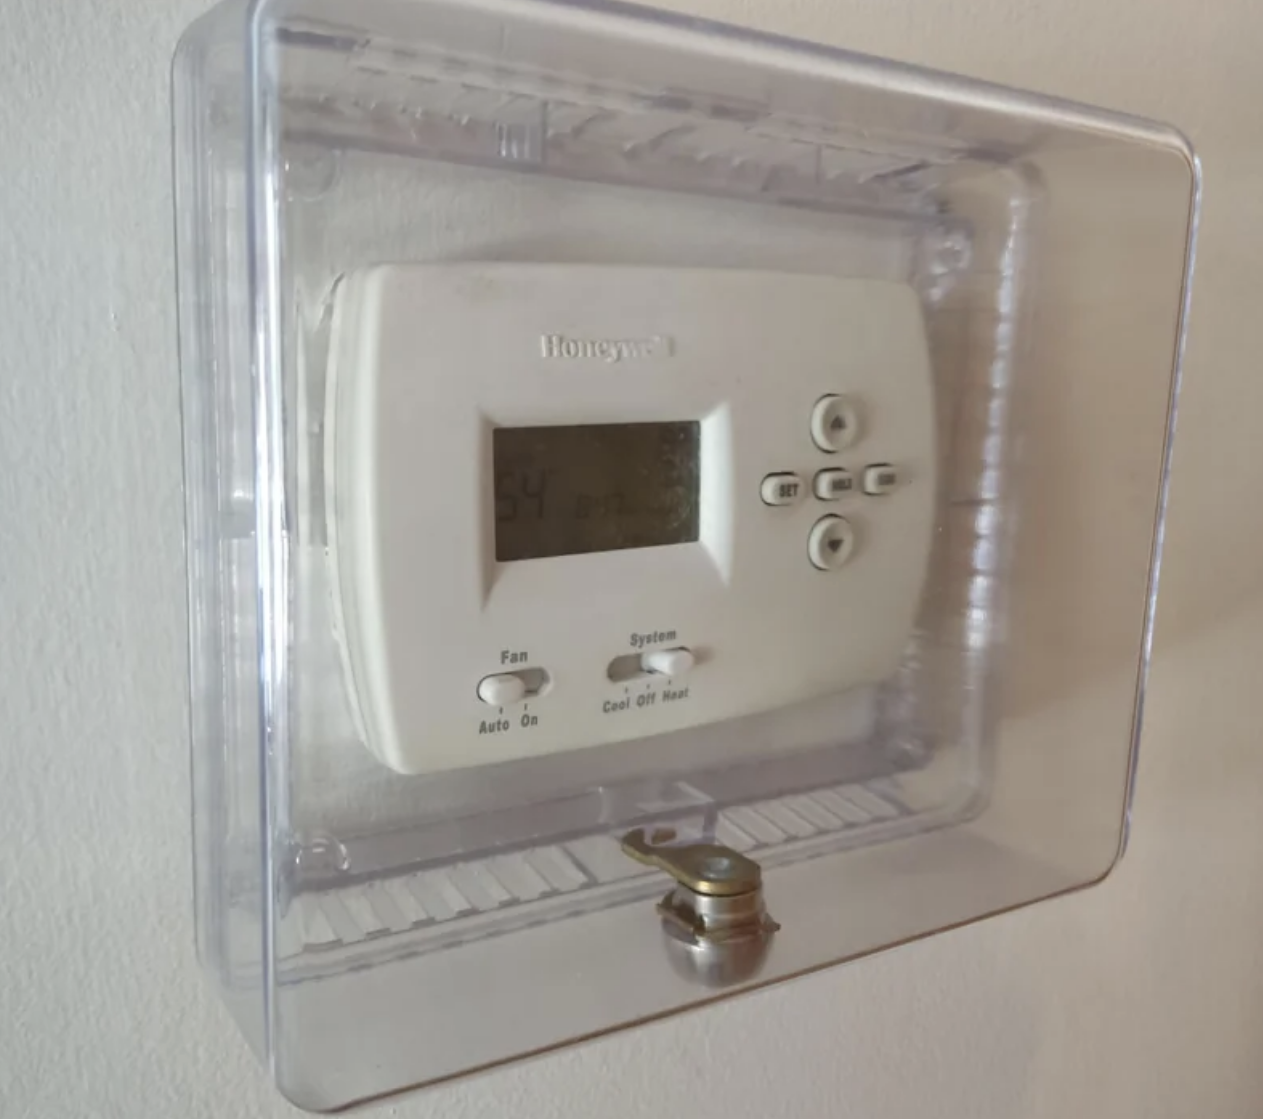 a locked box around the thermostat